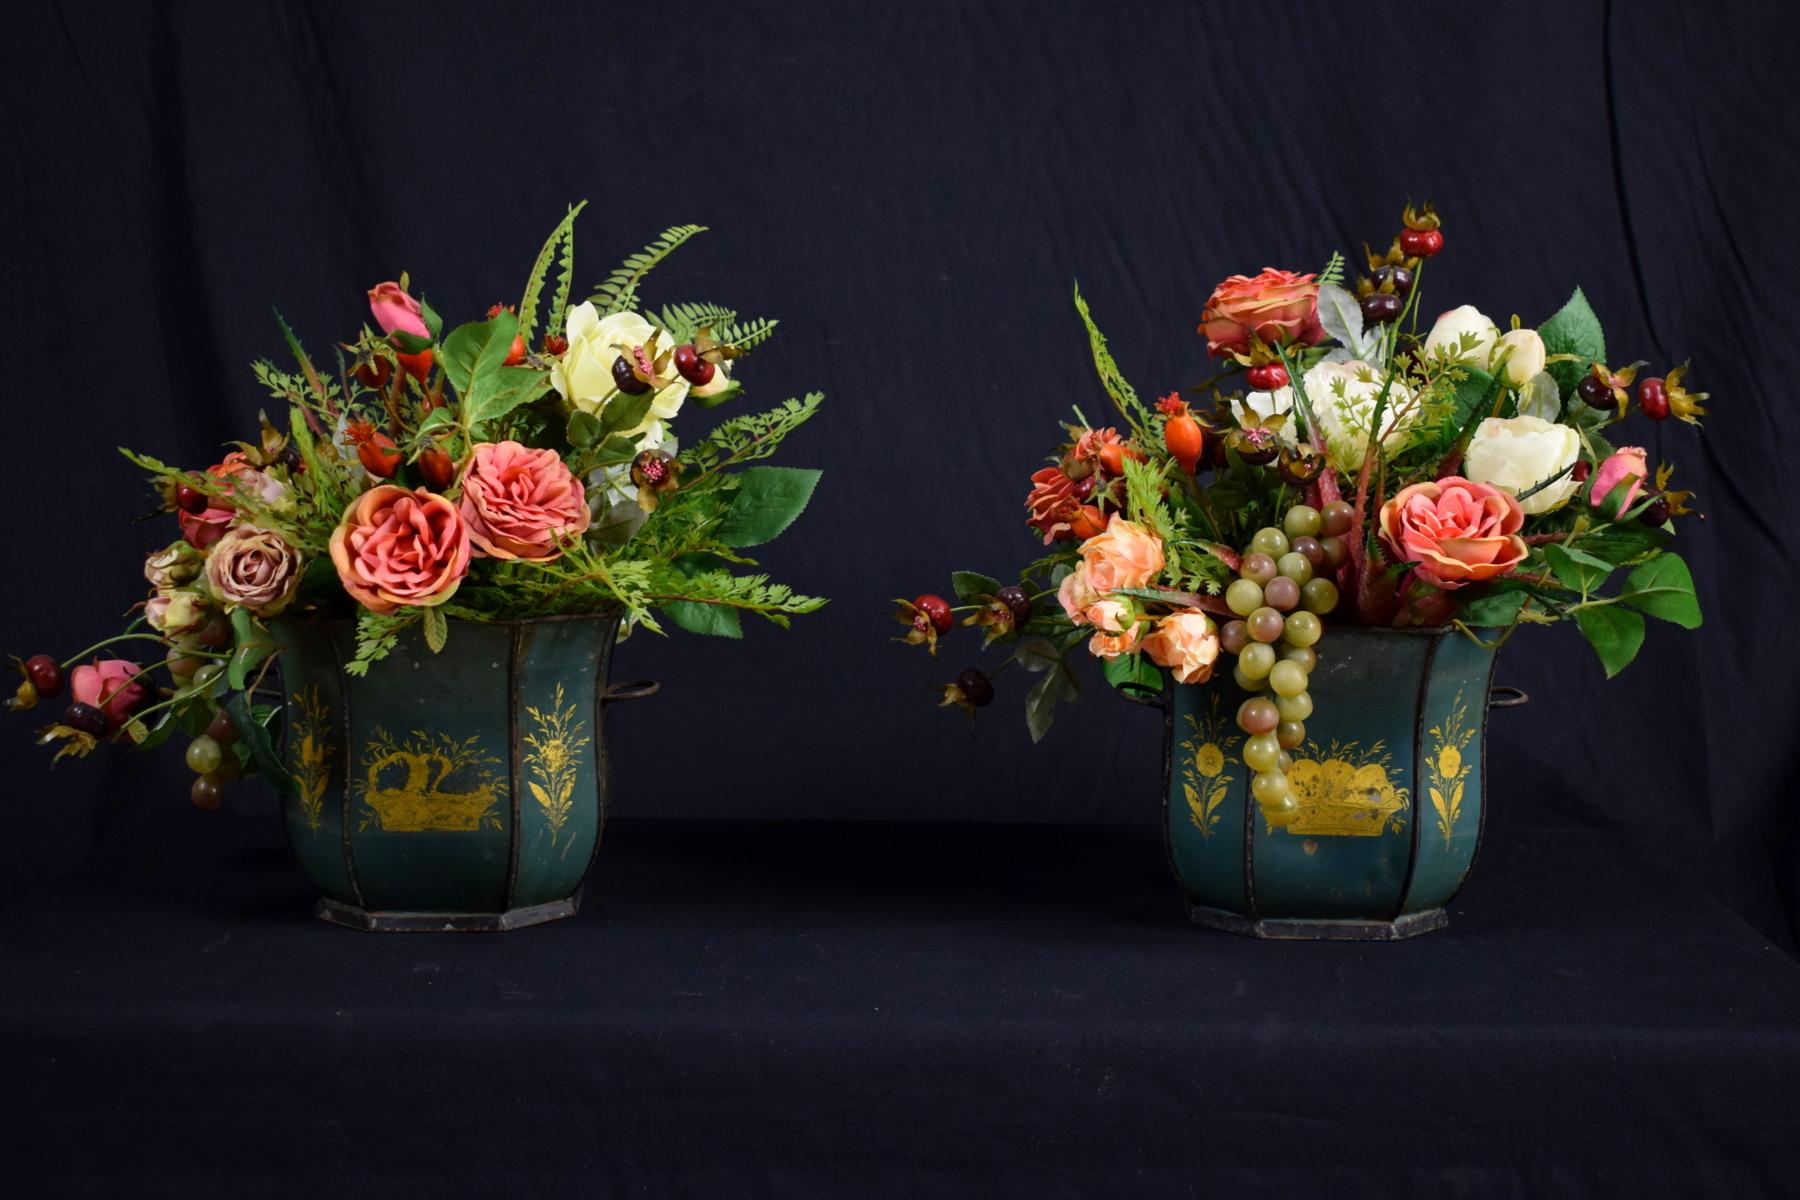 French 19th century pair of flower vases green lacquered metal with gold flowers.
The fine Italian artificial flower composition is included in the sale.